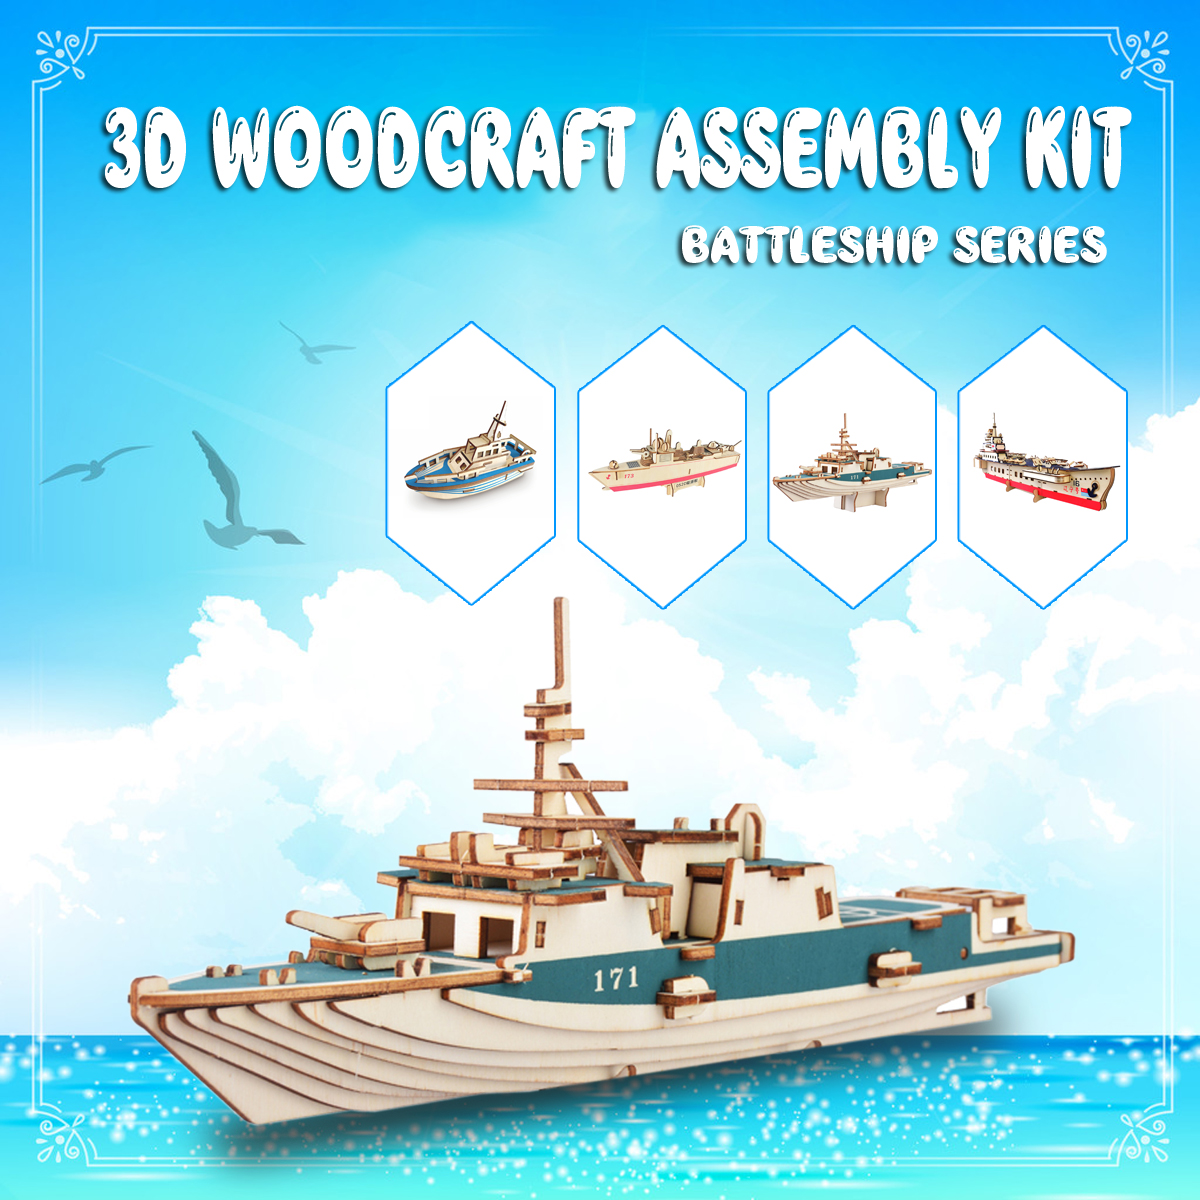 3D-Woodcraft-Assembly-Battleship-Series-Kit-Jigsaw-Puzzle-Toy-Decoration-Model-for-Kids-Gift-1632733-2